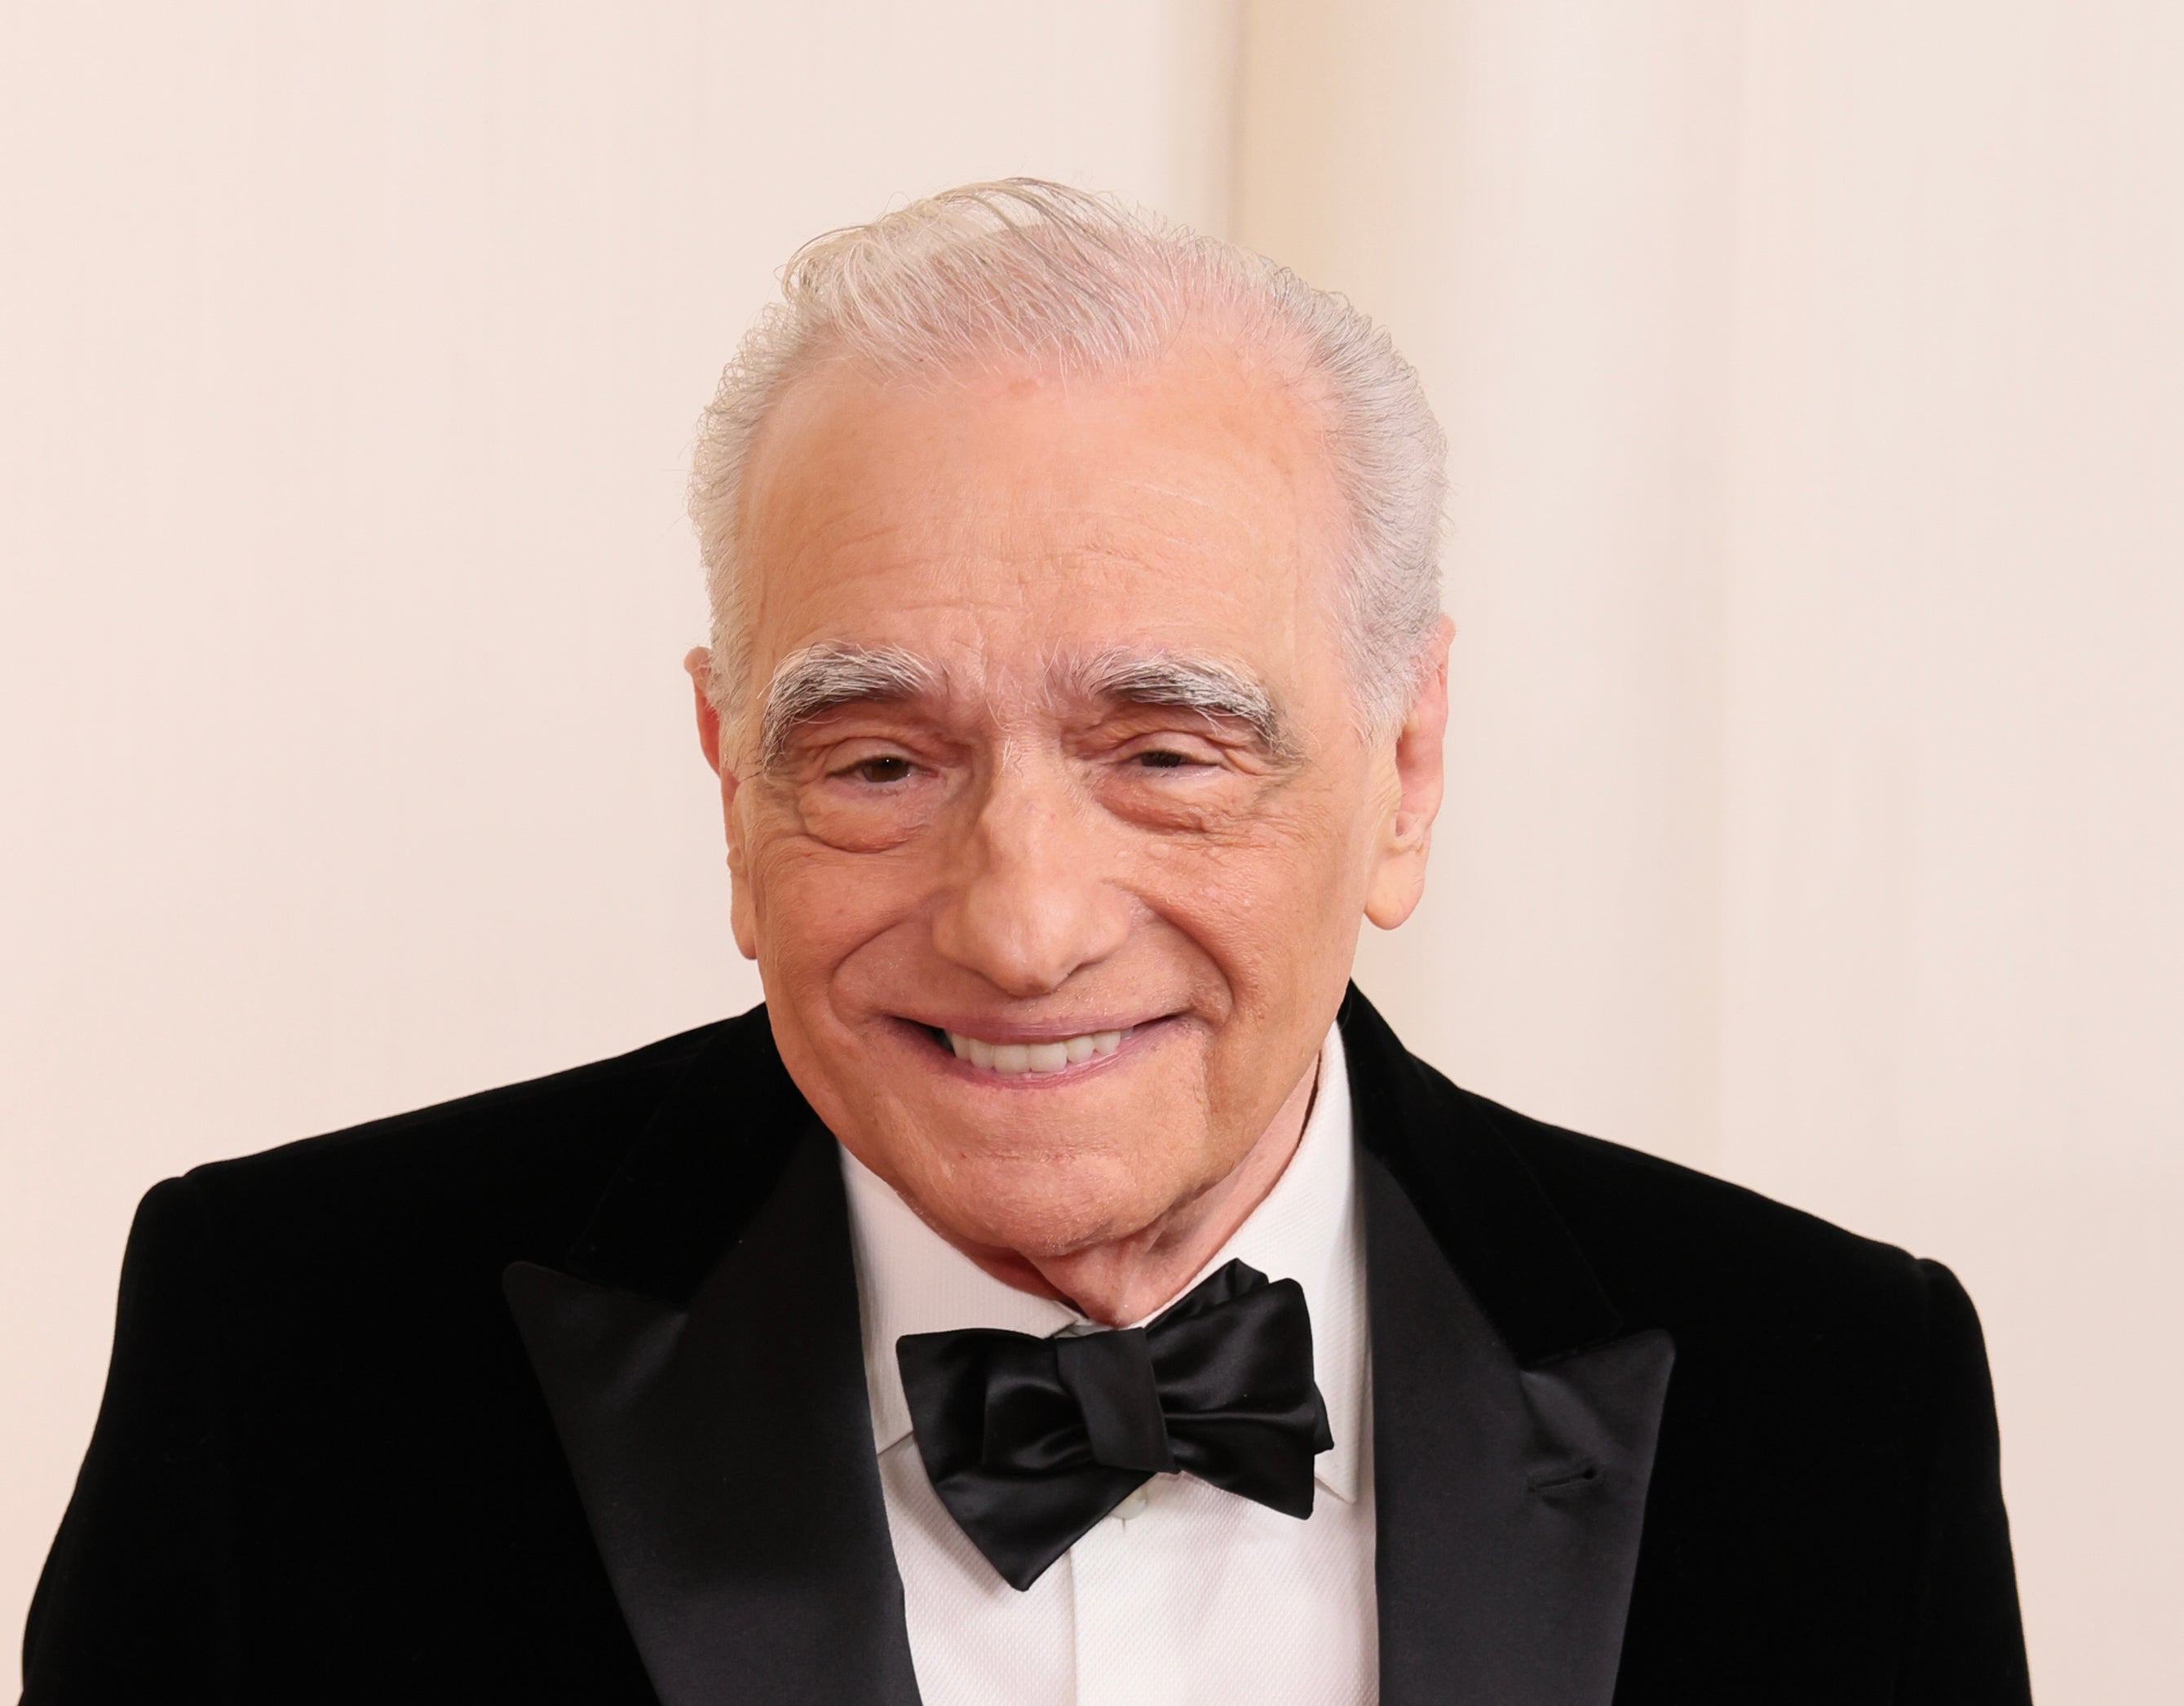 Martin Scorsese smiling in a bow tie